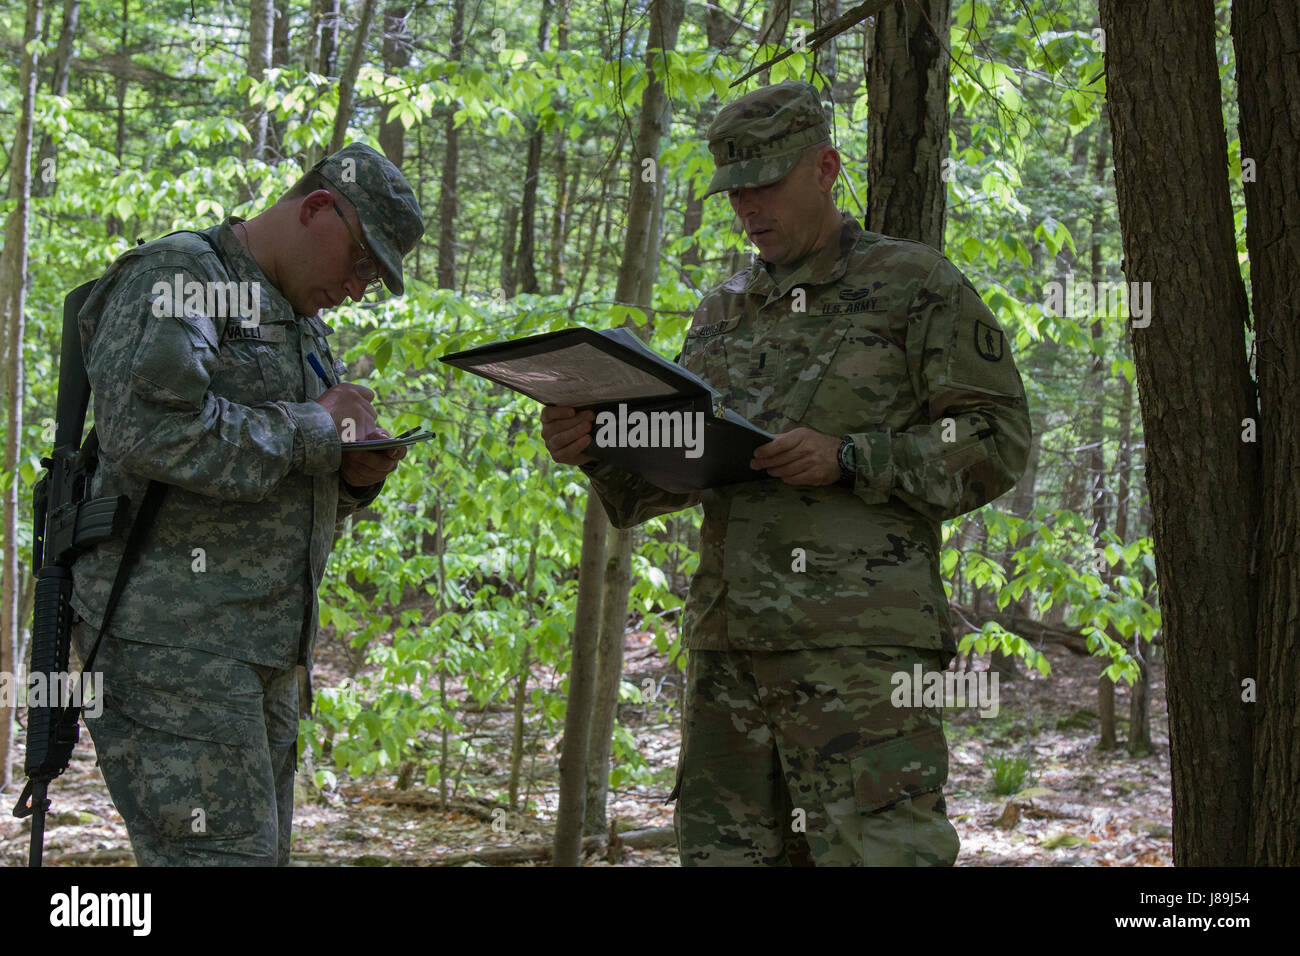 A U.S. Army officer candidate, acting as squad leader, receives operations order for a reconnaissance operations lane at New Hampshire National Guard Training Site in Center Strafford, Nh., May 19, 2017. Soldiers from Connecticut, Maine, Massachusetts, New Hampshire, New Jersey, New York, Rhode Island, and Vermont participated in the Officer Candidate School Field Leadership Exercise in preparation for graduation and commission. (U.S. Army National Guard photo by Spc. Avery Cunningham) Stock Photo